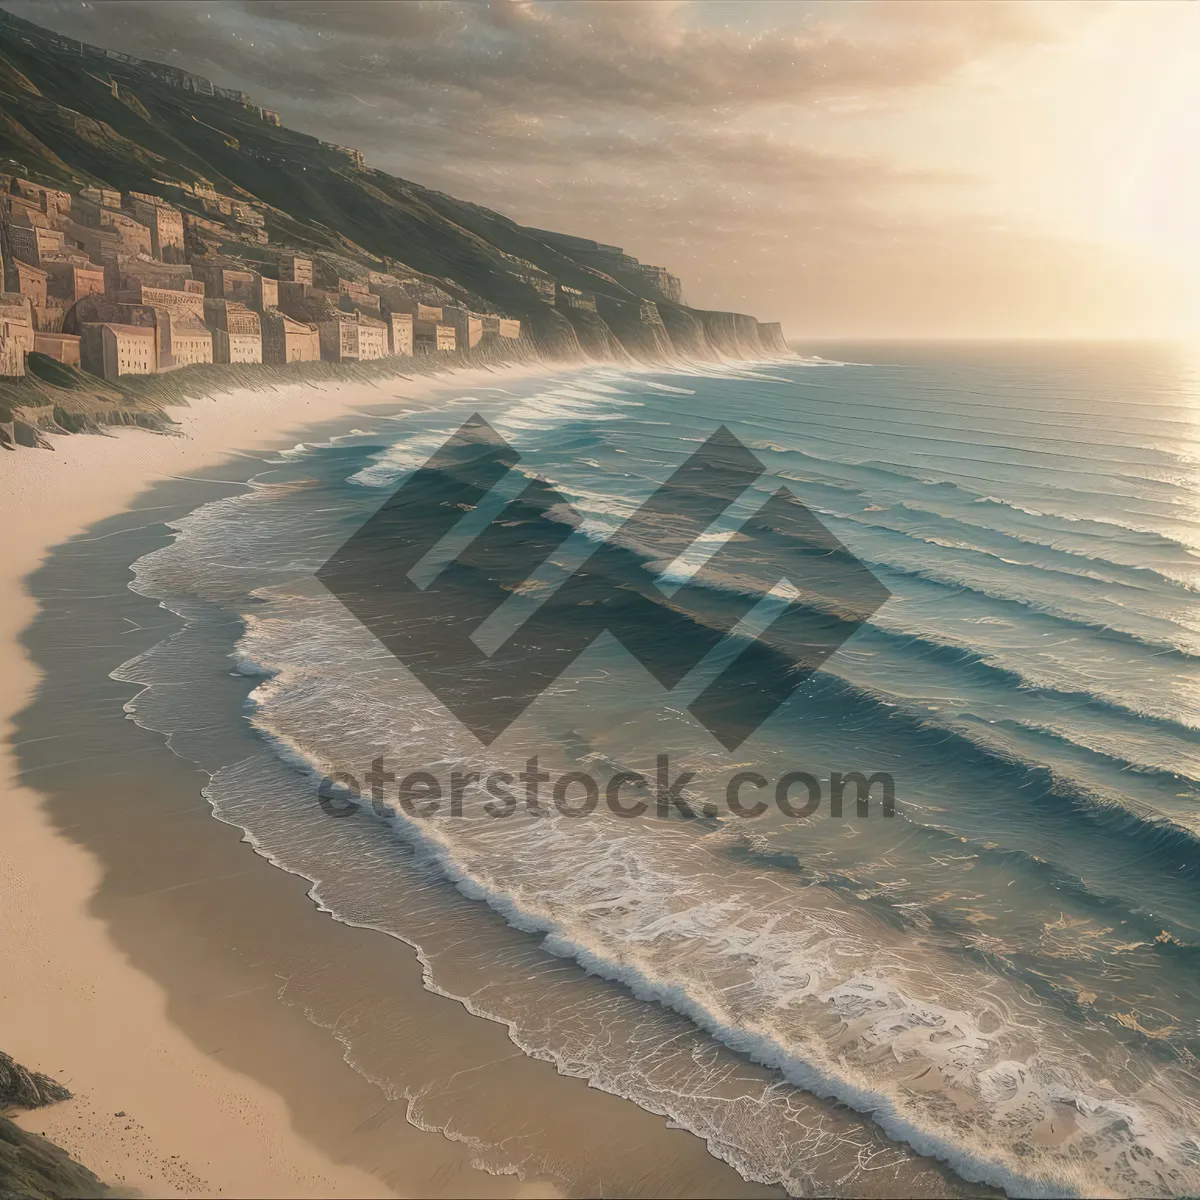 Picture of Tropical Waves crashing on sandy Beach